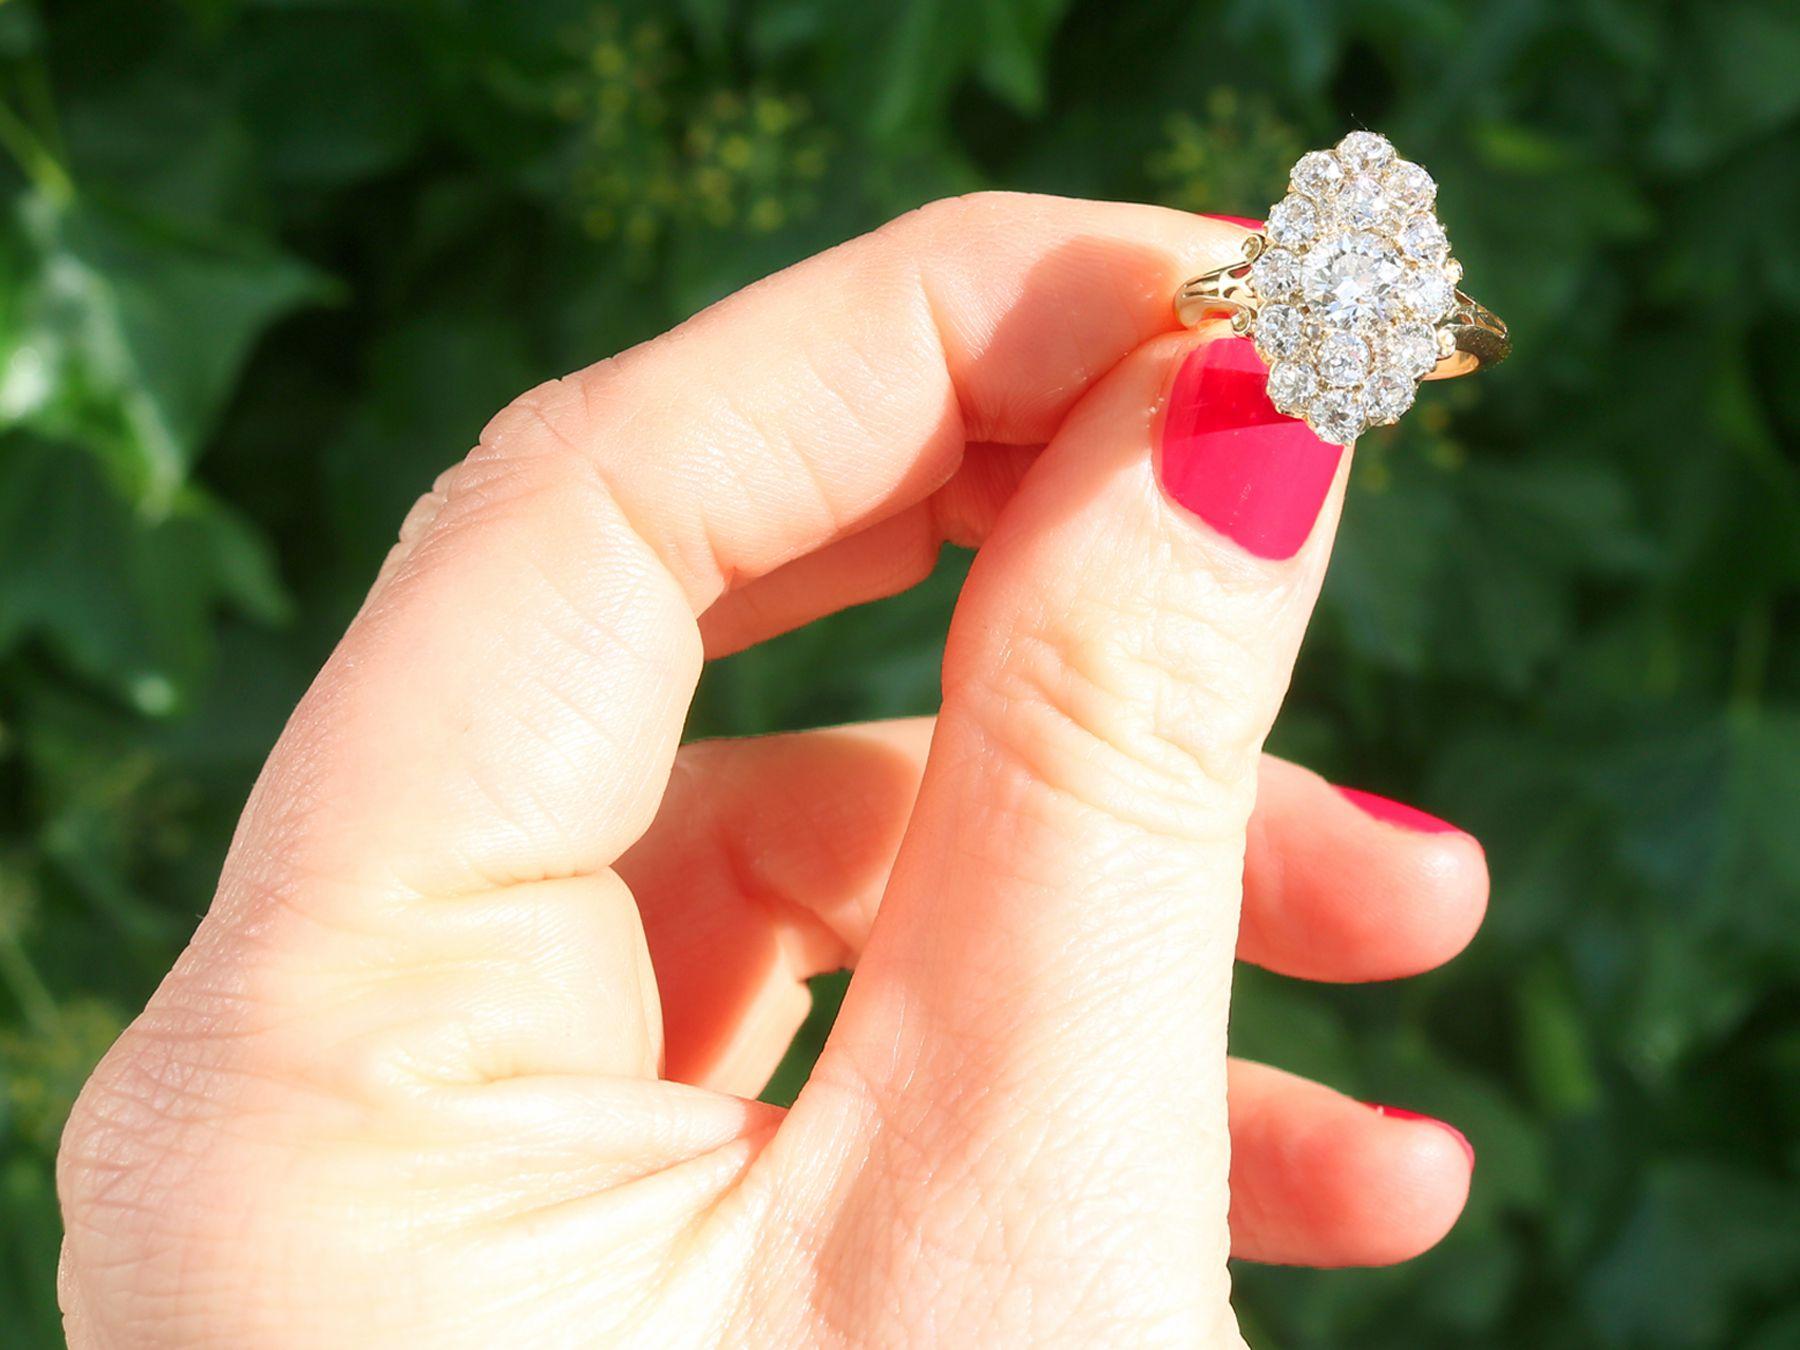 A stunning, fine and impressive antique Victorian 2.35 carat diamond and 18 karat yellow gold dress ring; part of our diverse antique jewellery and estate jewelry collections.

This stunning antique ring has been crafted in 18k yellow gold.

The